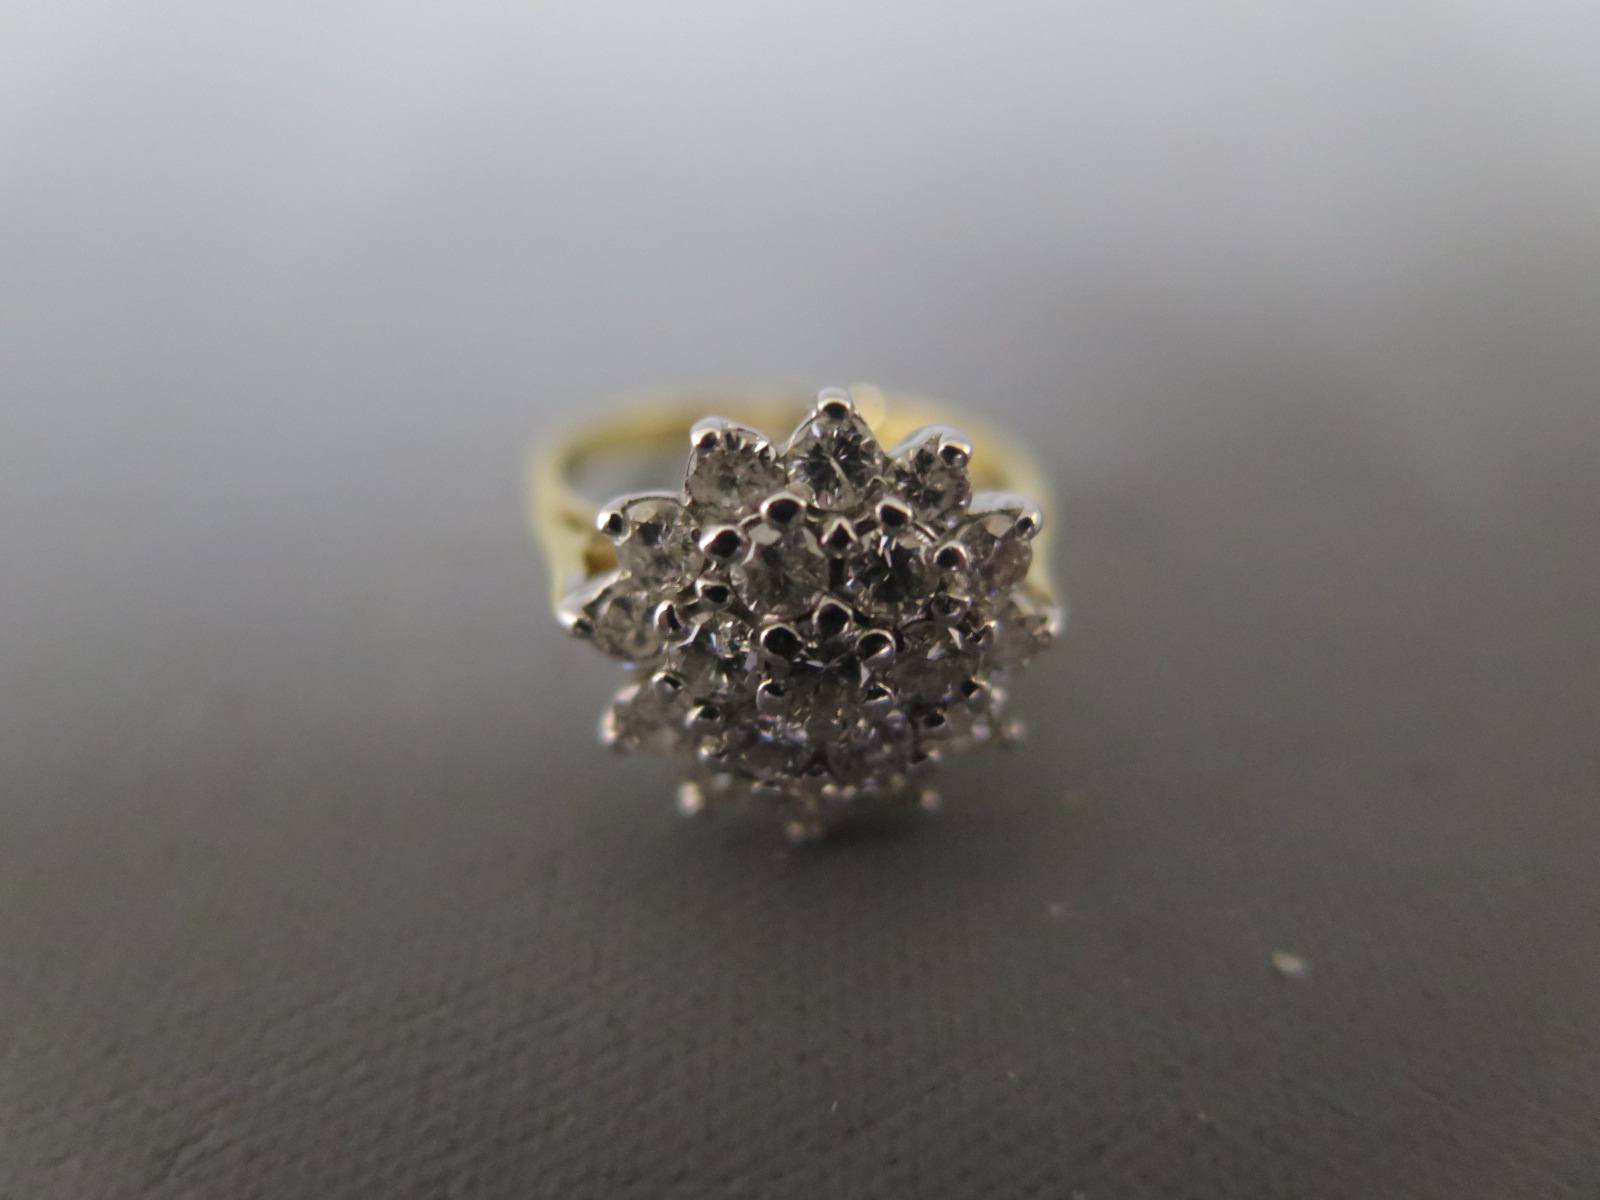 An 18ct yellow gold and diamond cluster ring size H - approx weight 4 grams - clean and bright